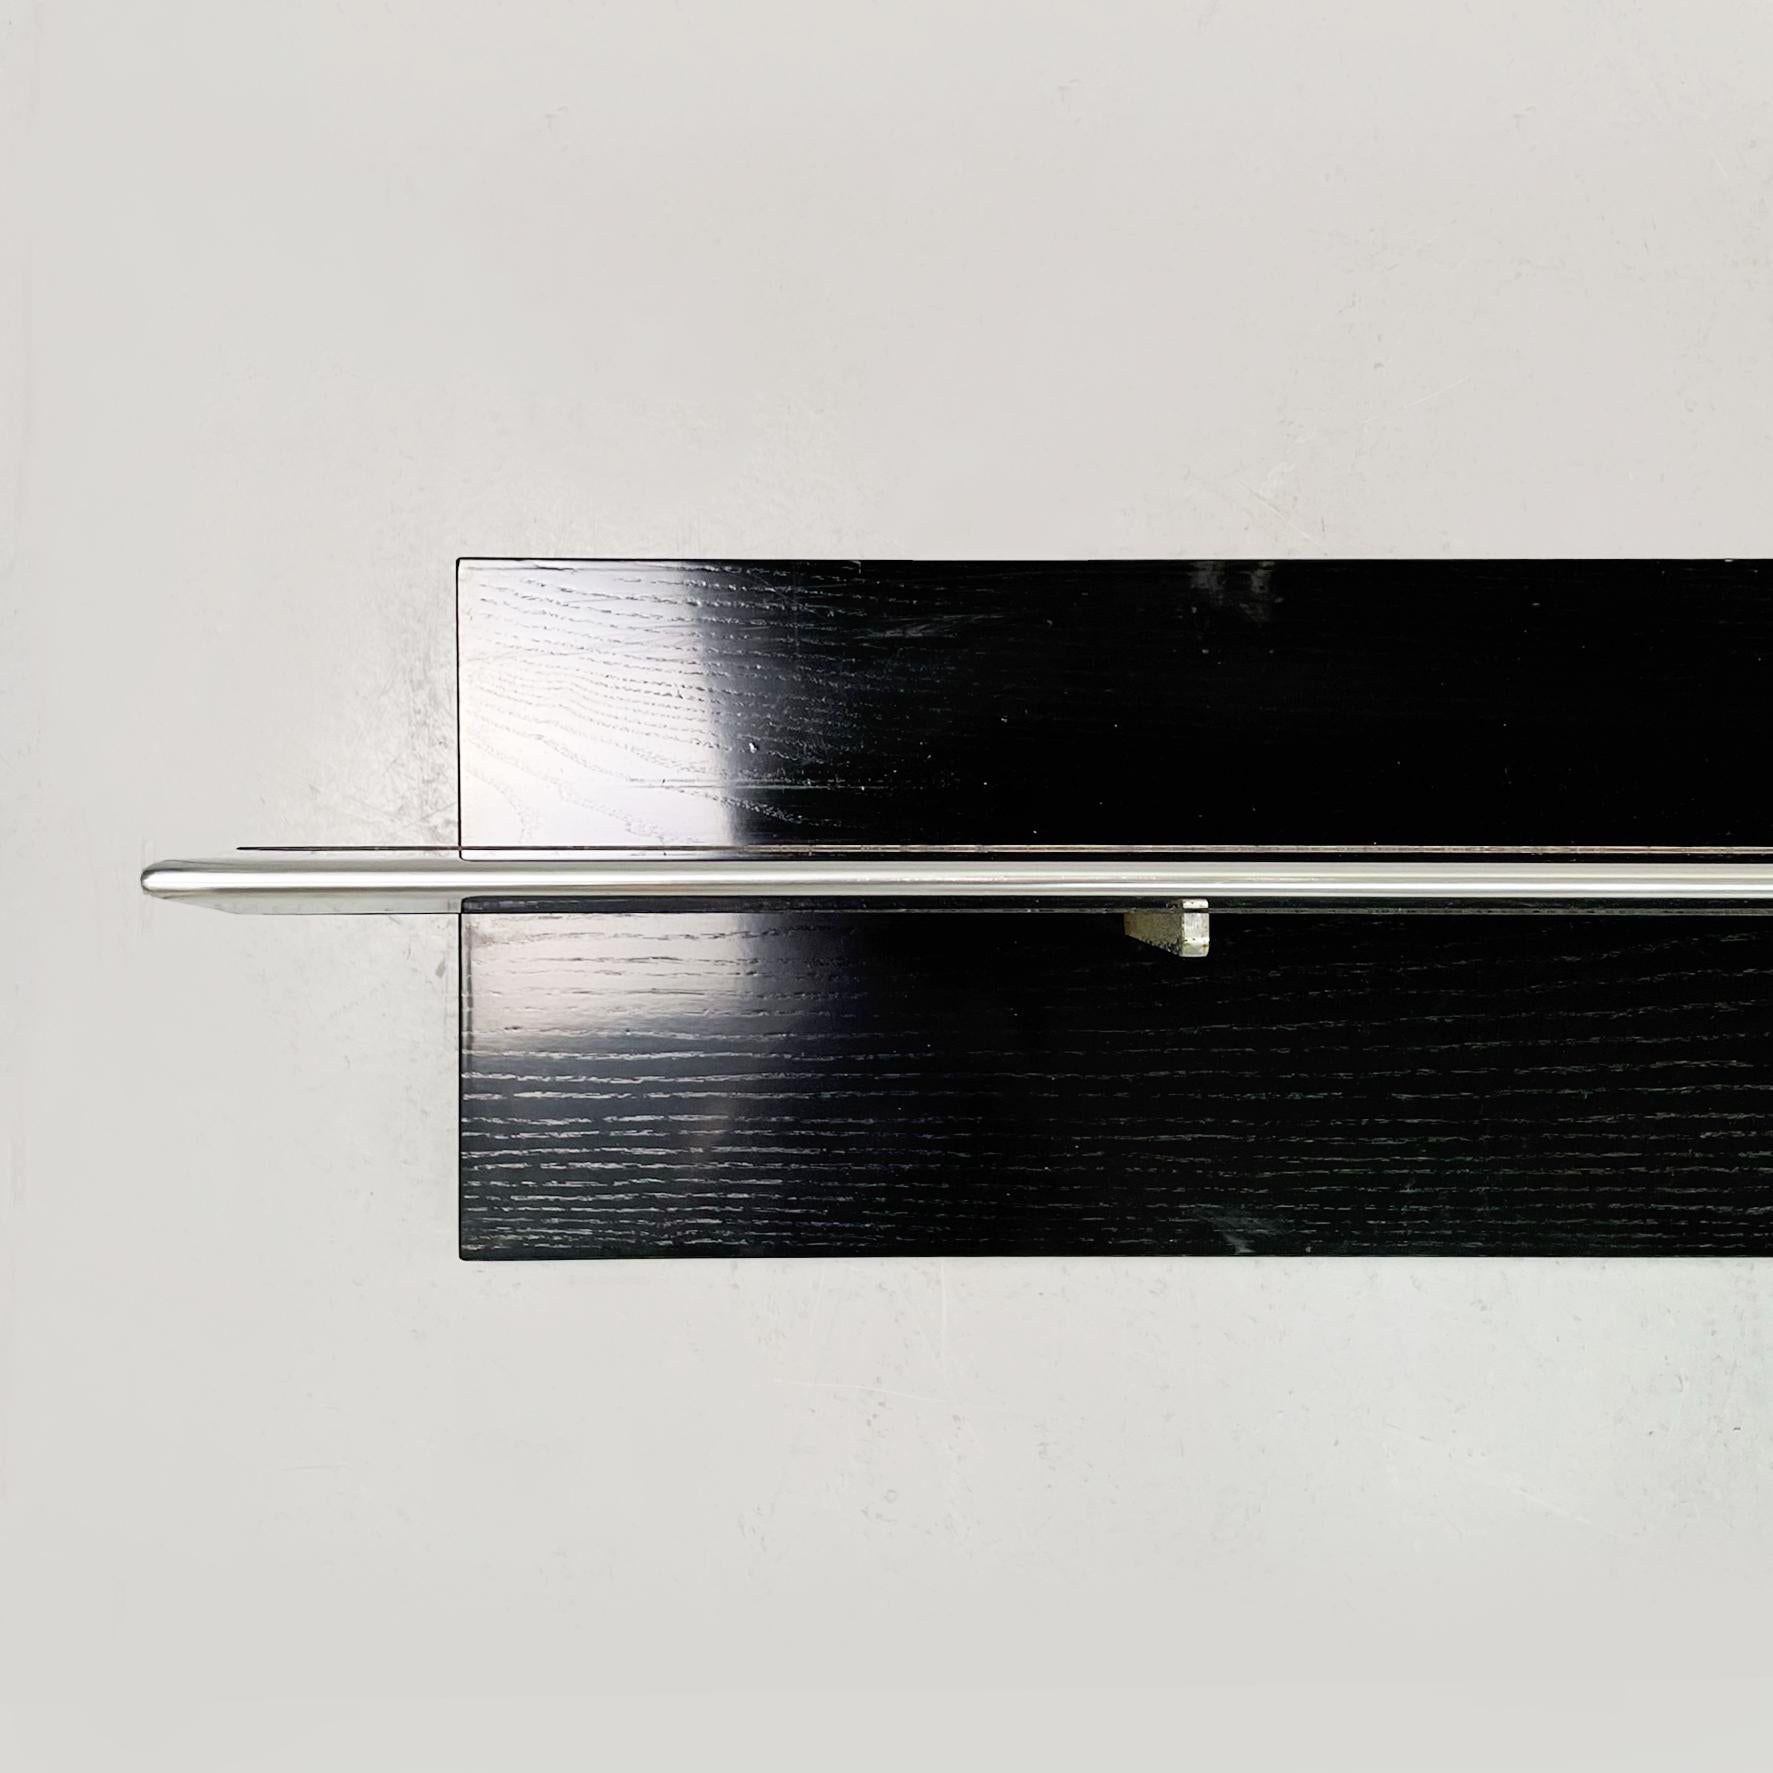 Italian modern Large shelf in black wood and steel, 1980s
Large shelf with rectangular top in black painted wood and steel finishes. The shelf has a vertical axis on which the 3 steel supports are placed.

1980s.

Good conditions, the supports